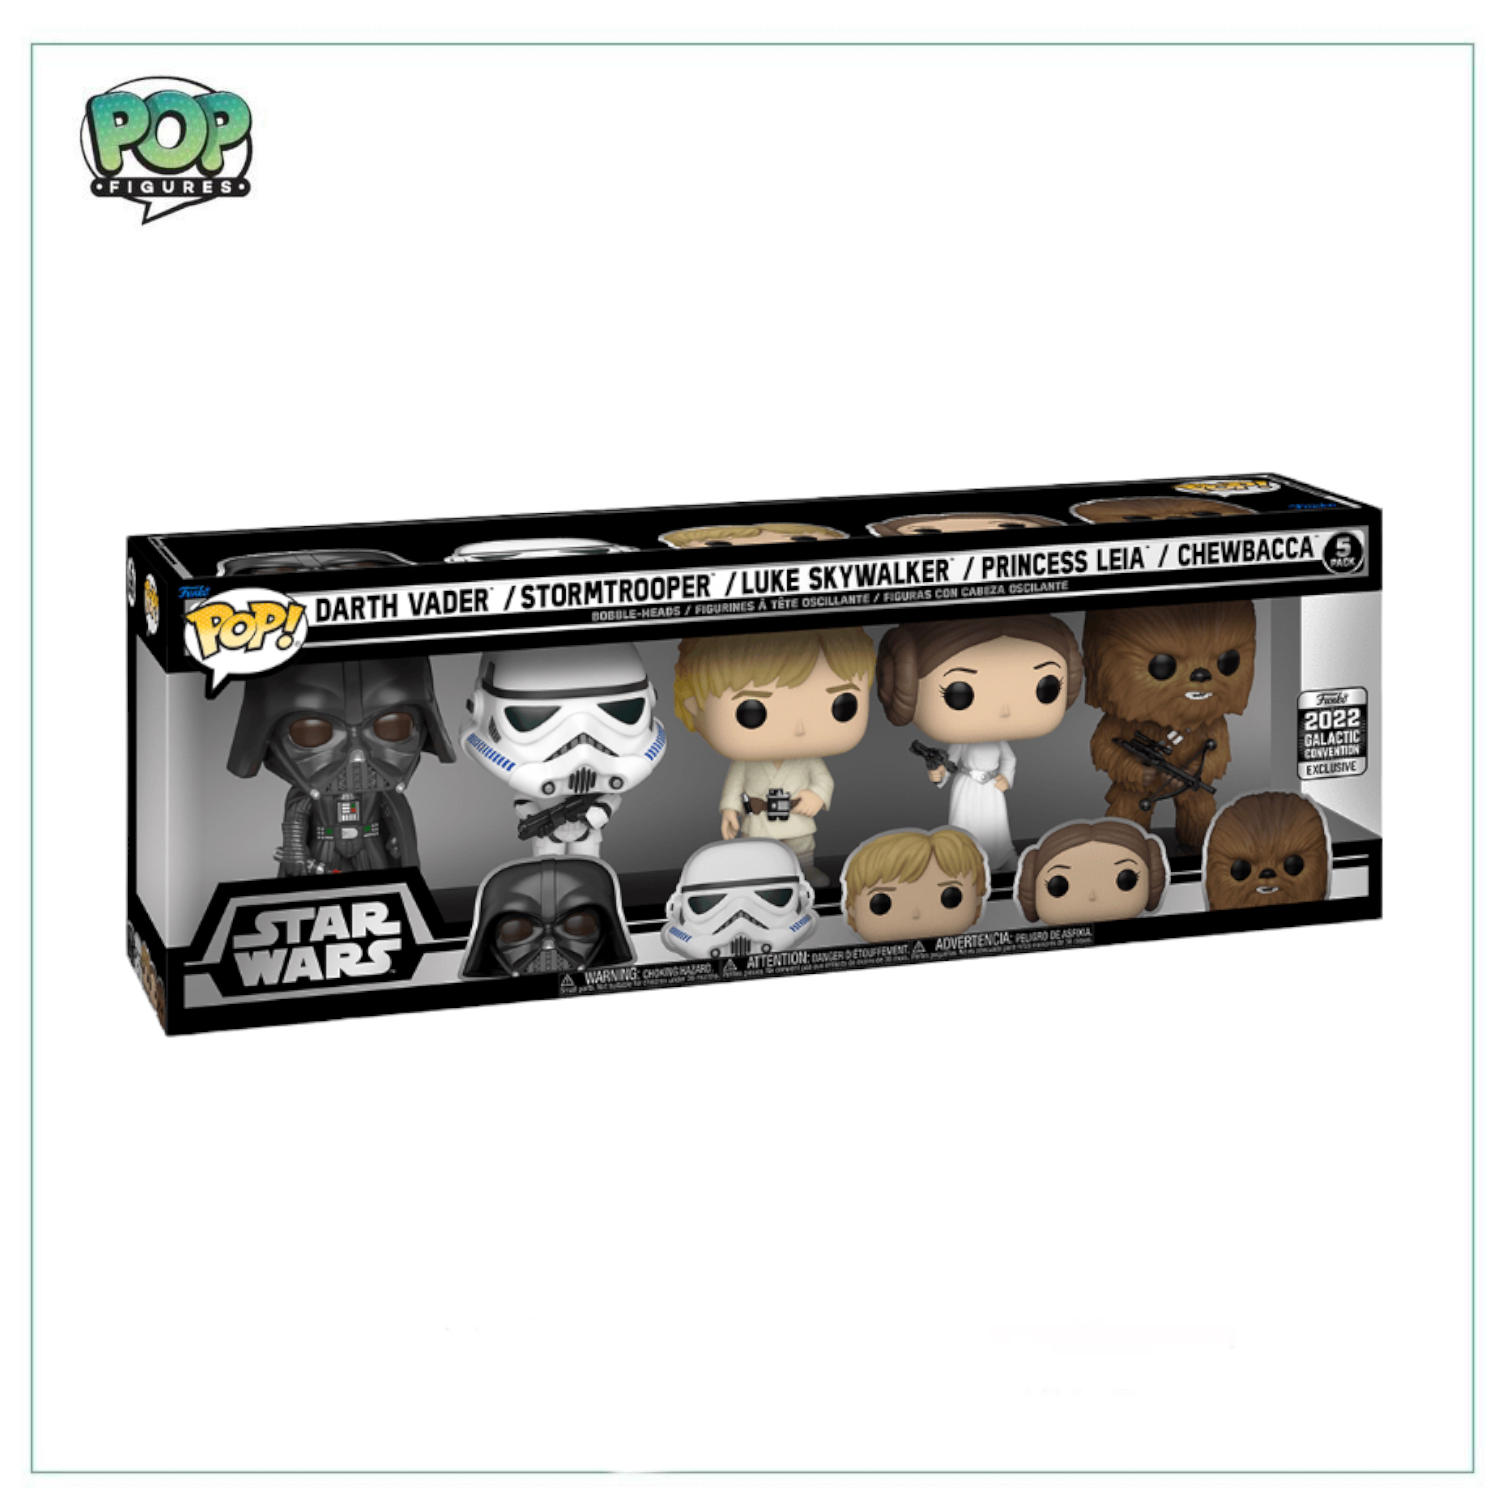 Darth Vader / Stormtrooper / Luke Skywalker / Princess Leia / Chewbacca - Deluxe Funko 5 Pack! - Star Wars -  Funko Galactic Convention 2022 Exclusive - Condition 9/10